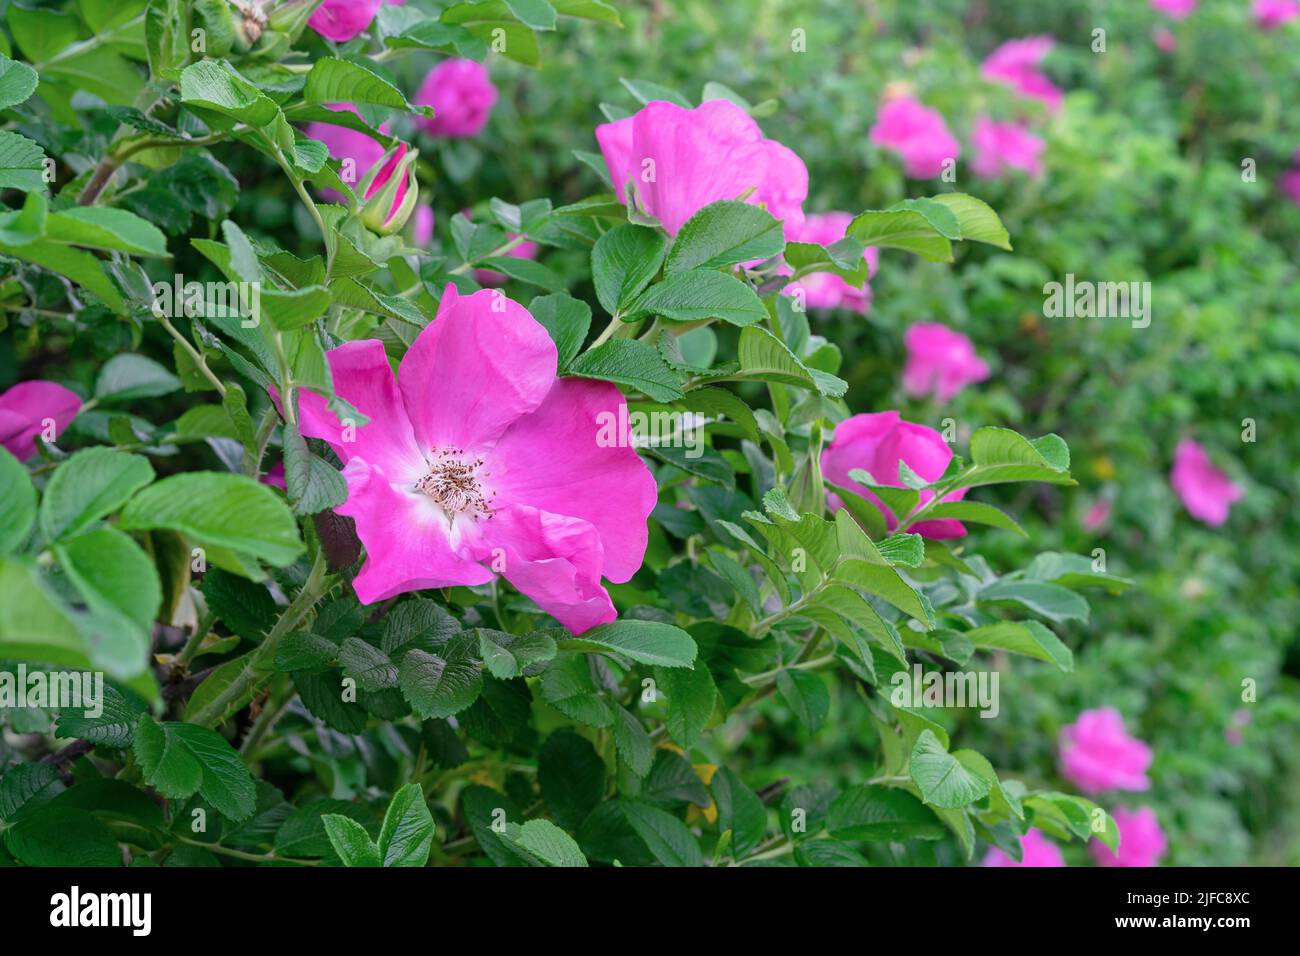 Purple rosehip flowers or dog rose against green foliage. Stock Photo